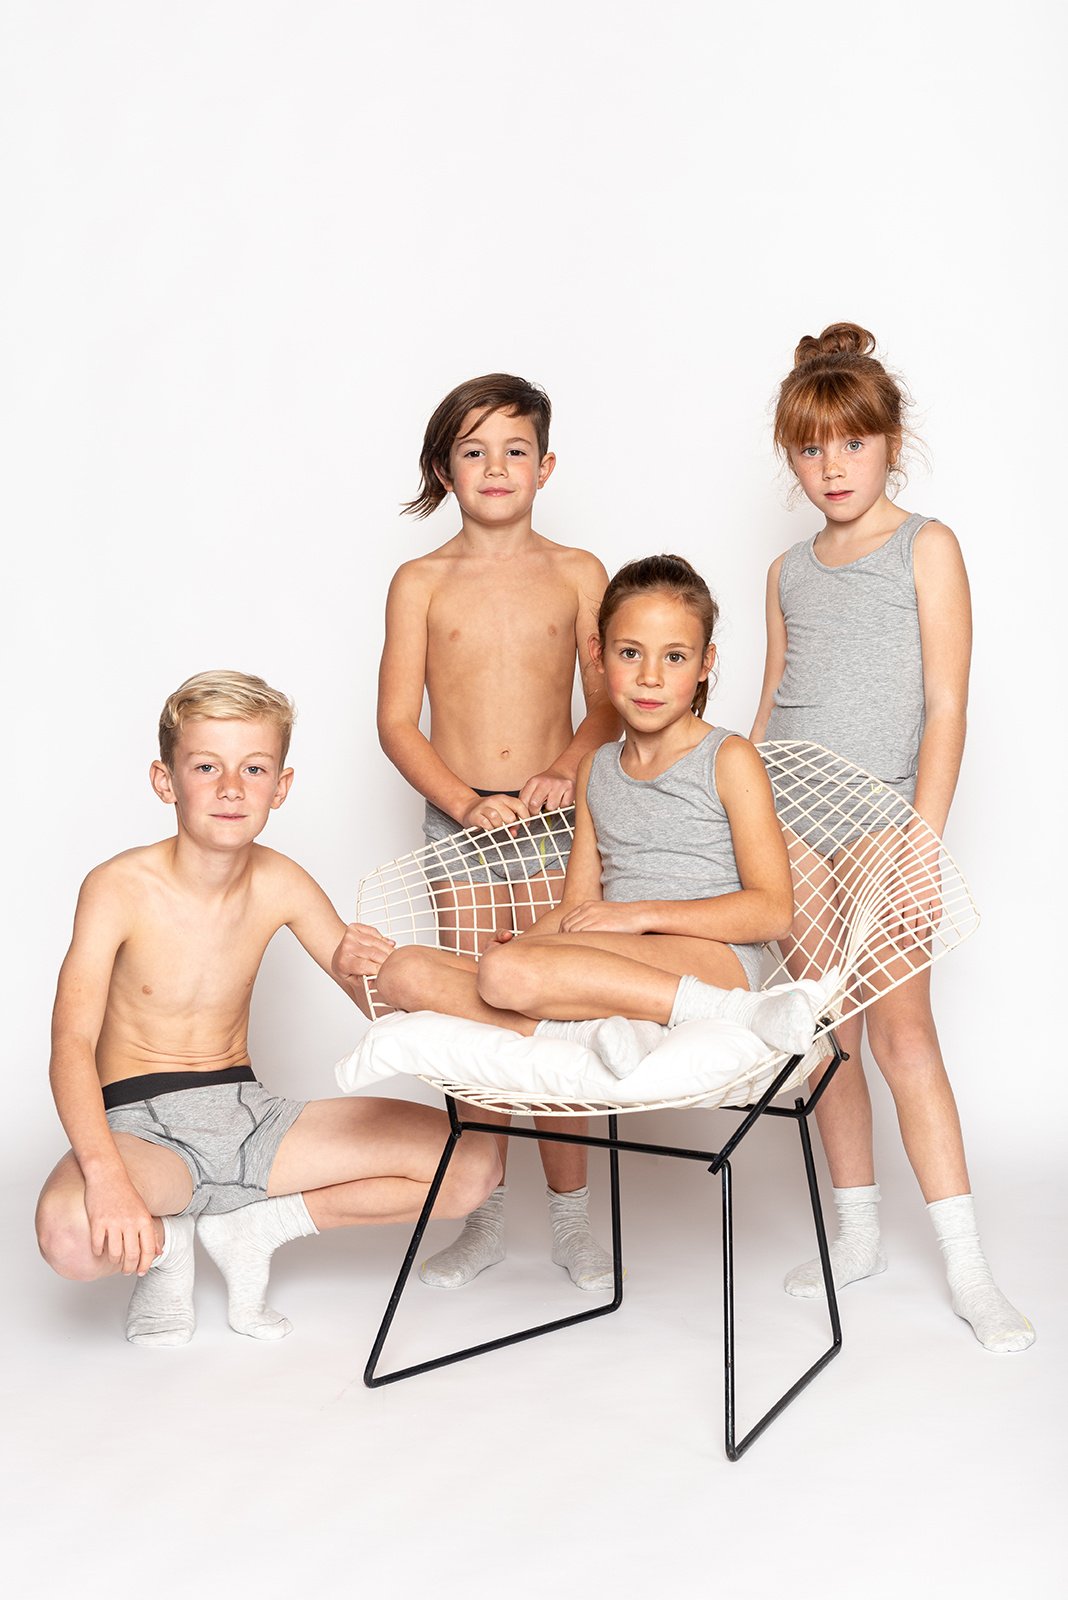 Send Your Child to School in Style with New Undies